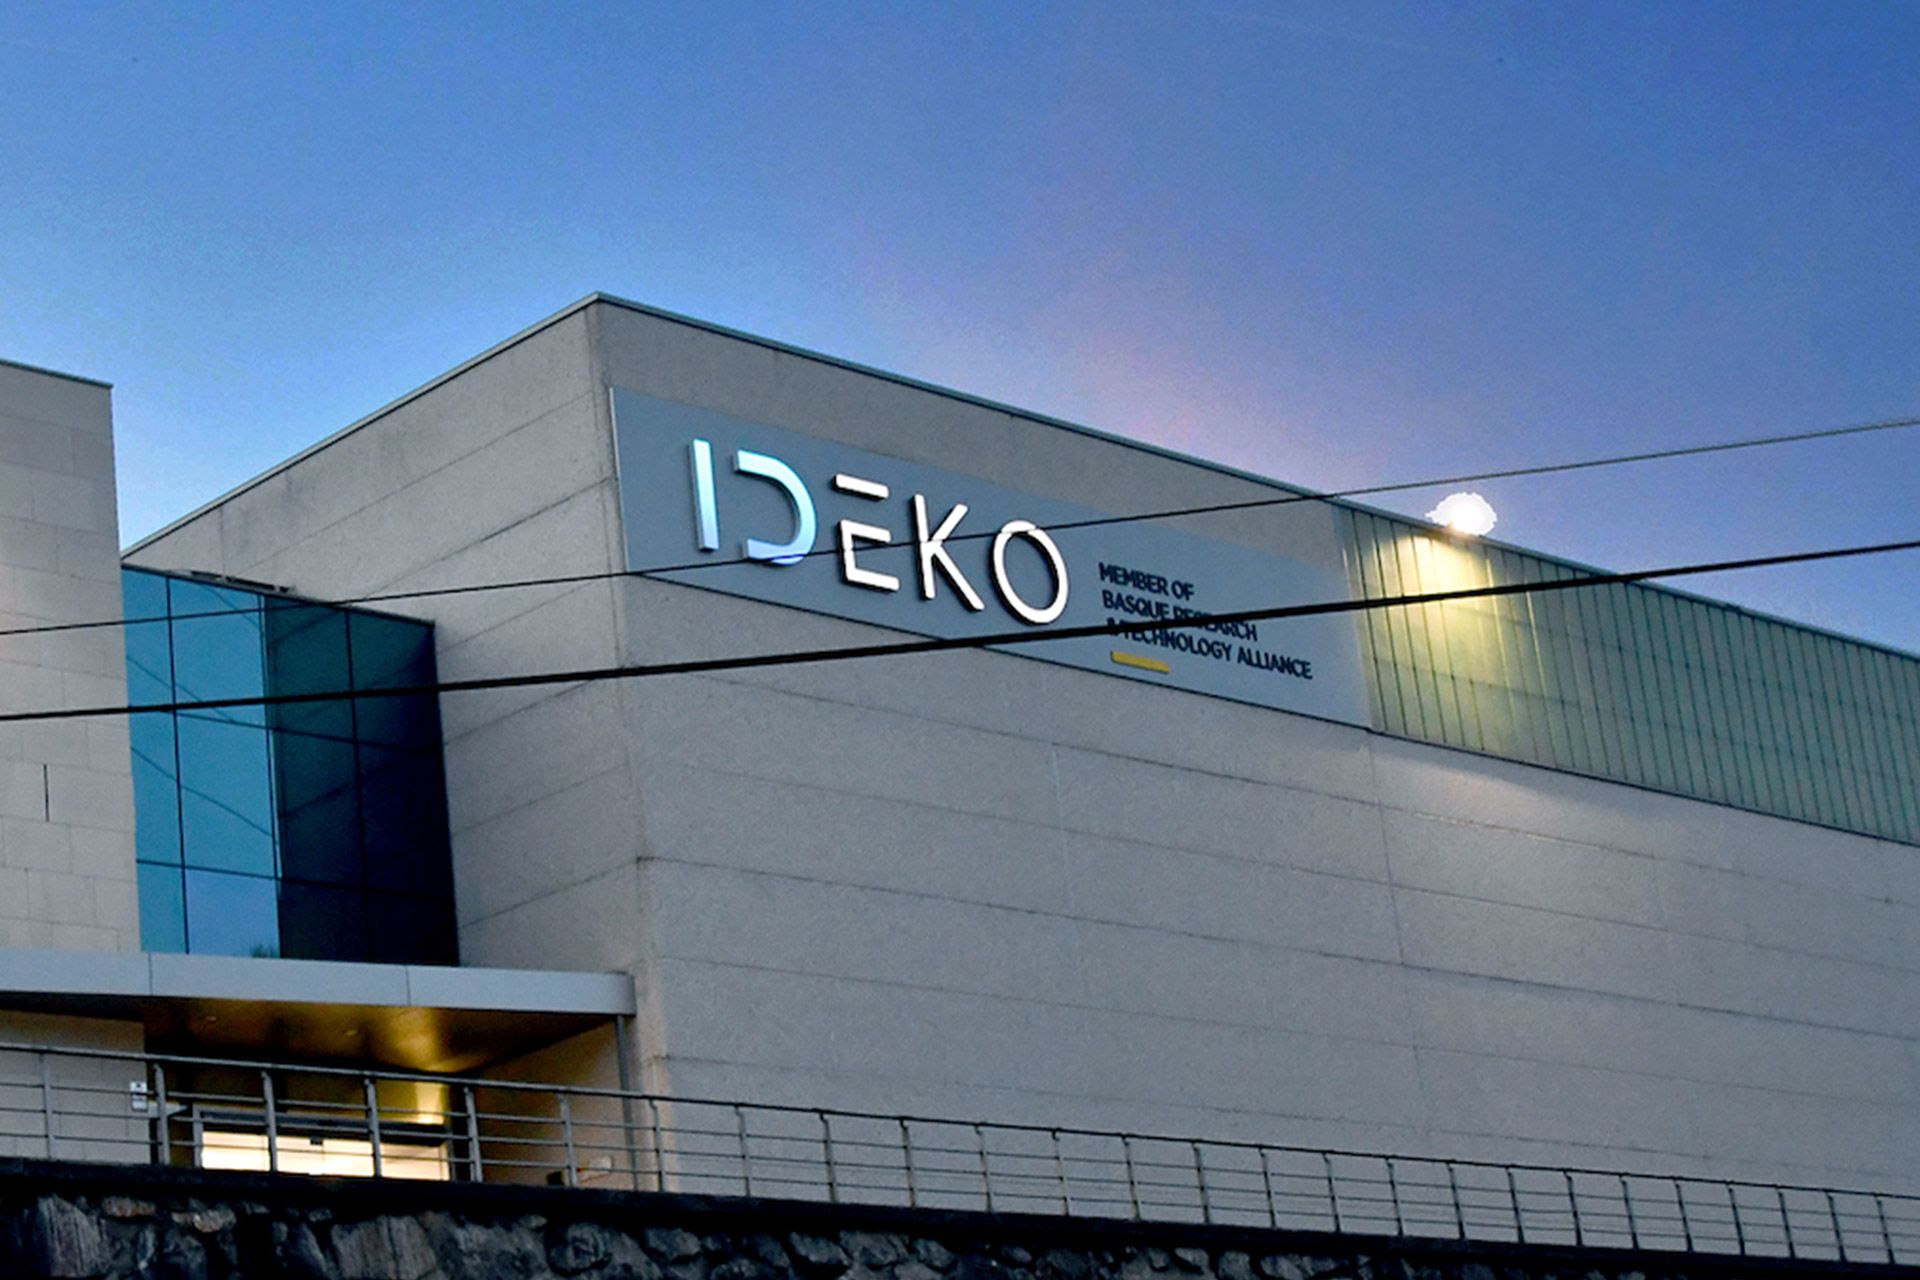 Ideko Research Centre was founded